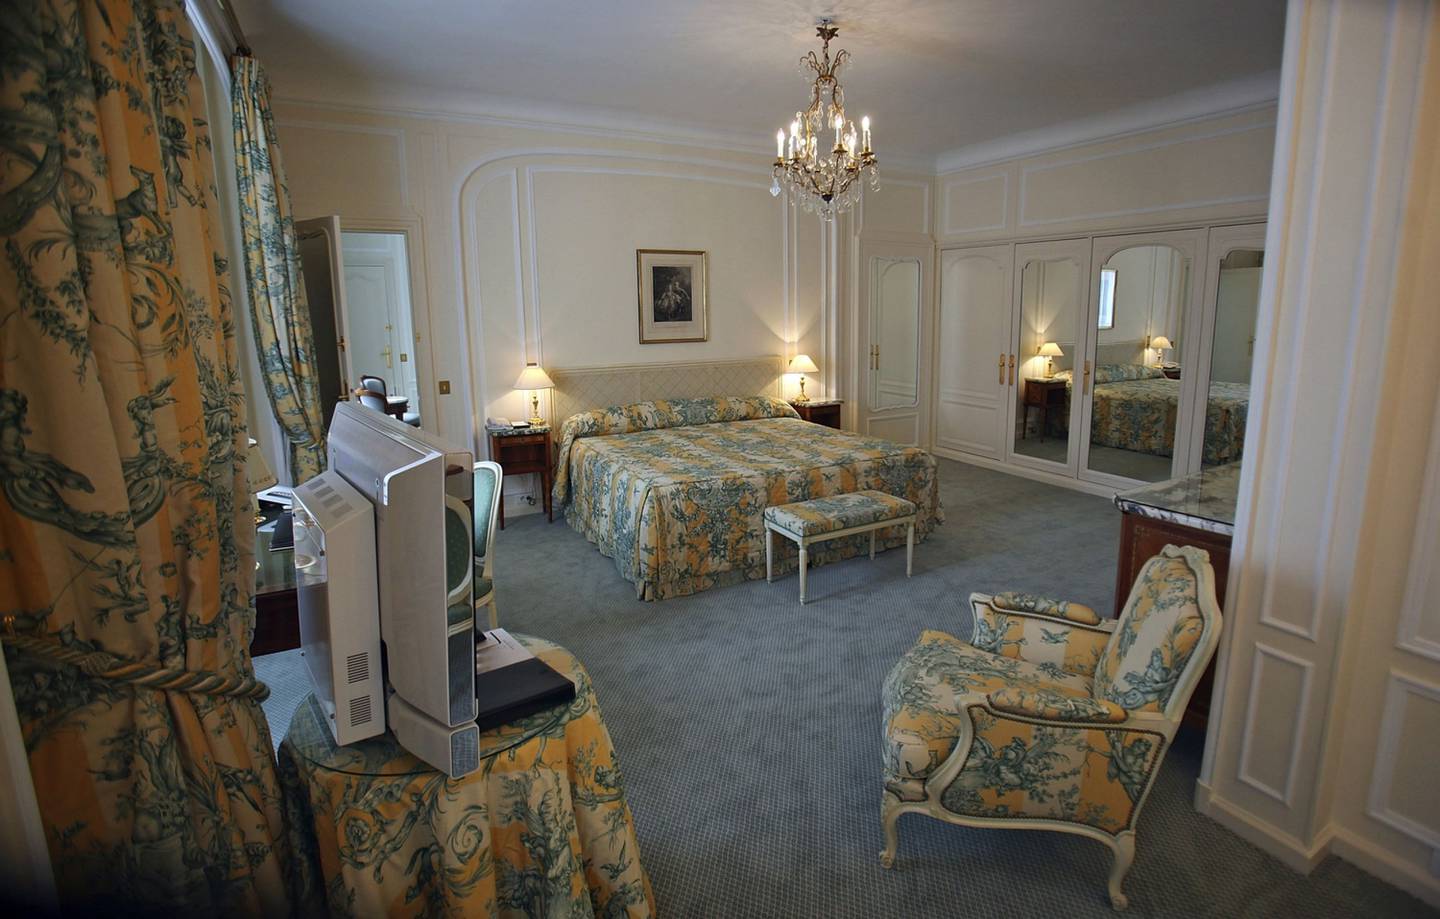 A bedroom suite is seen at Le Bristol hotel in Paris, France, on Tuesday, June 14, 2011. Eight deluxe French hotels were crowned with the rare distinction of "palace" status in May, a new industry classification for luxury that goes beyond a mere five stars. Four Paris hotels, the Bristol, the Meurice, the Park Hyatt and the Plaza Athenee made the list. Photographer: Simon Dawson/Bloombergdfd